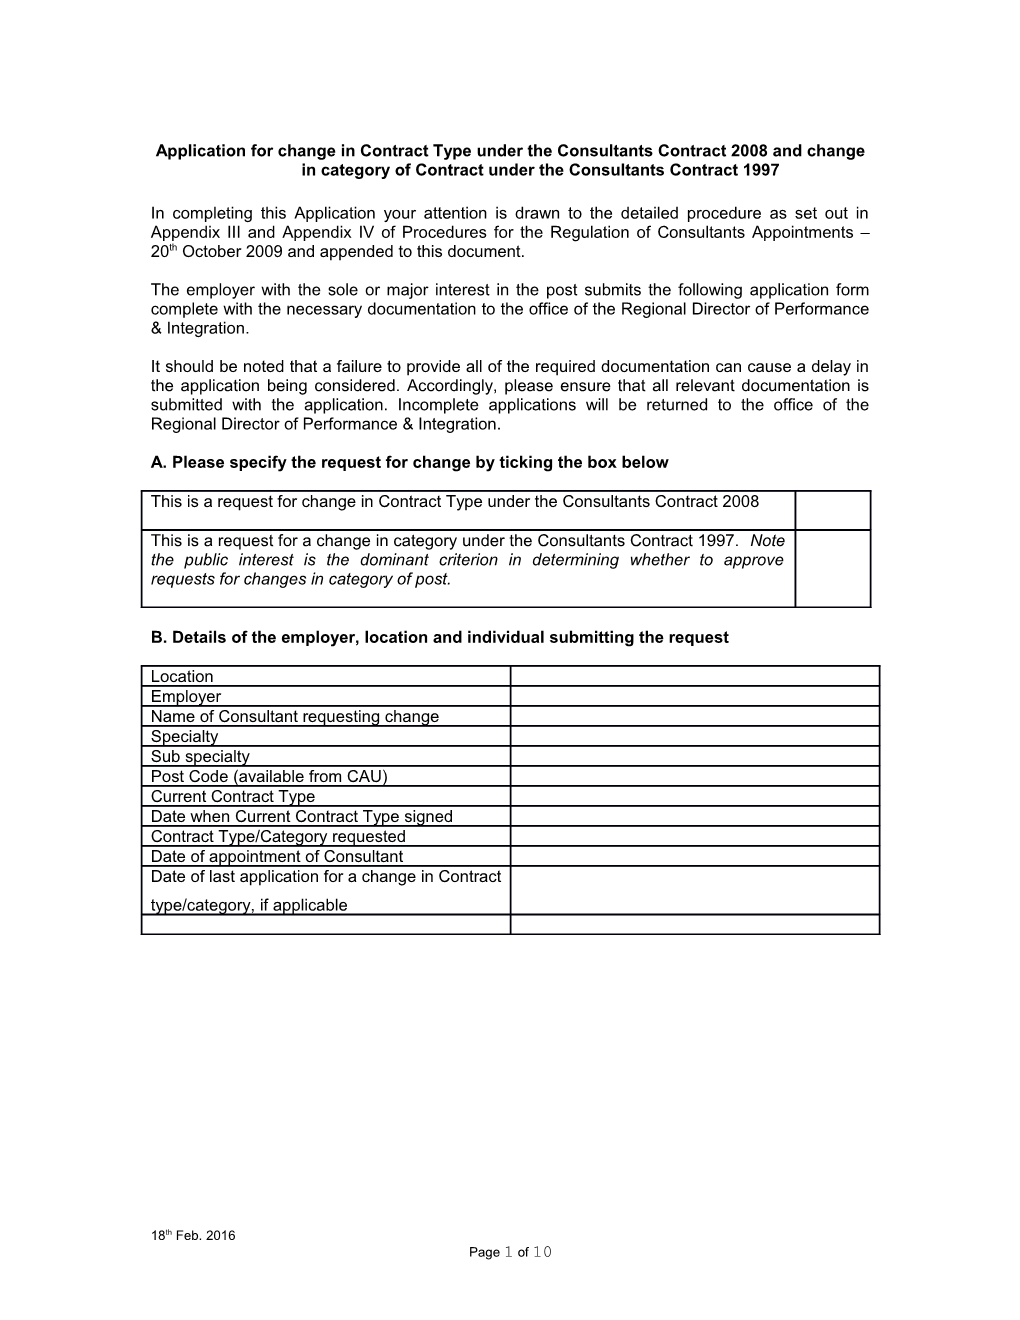 Procedures for Change in Category of Contract Under the Consultants Contract 1997